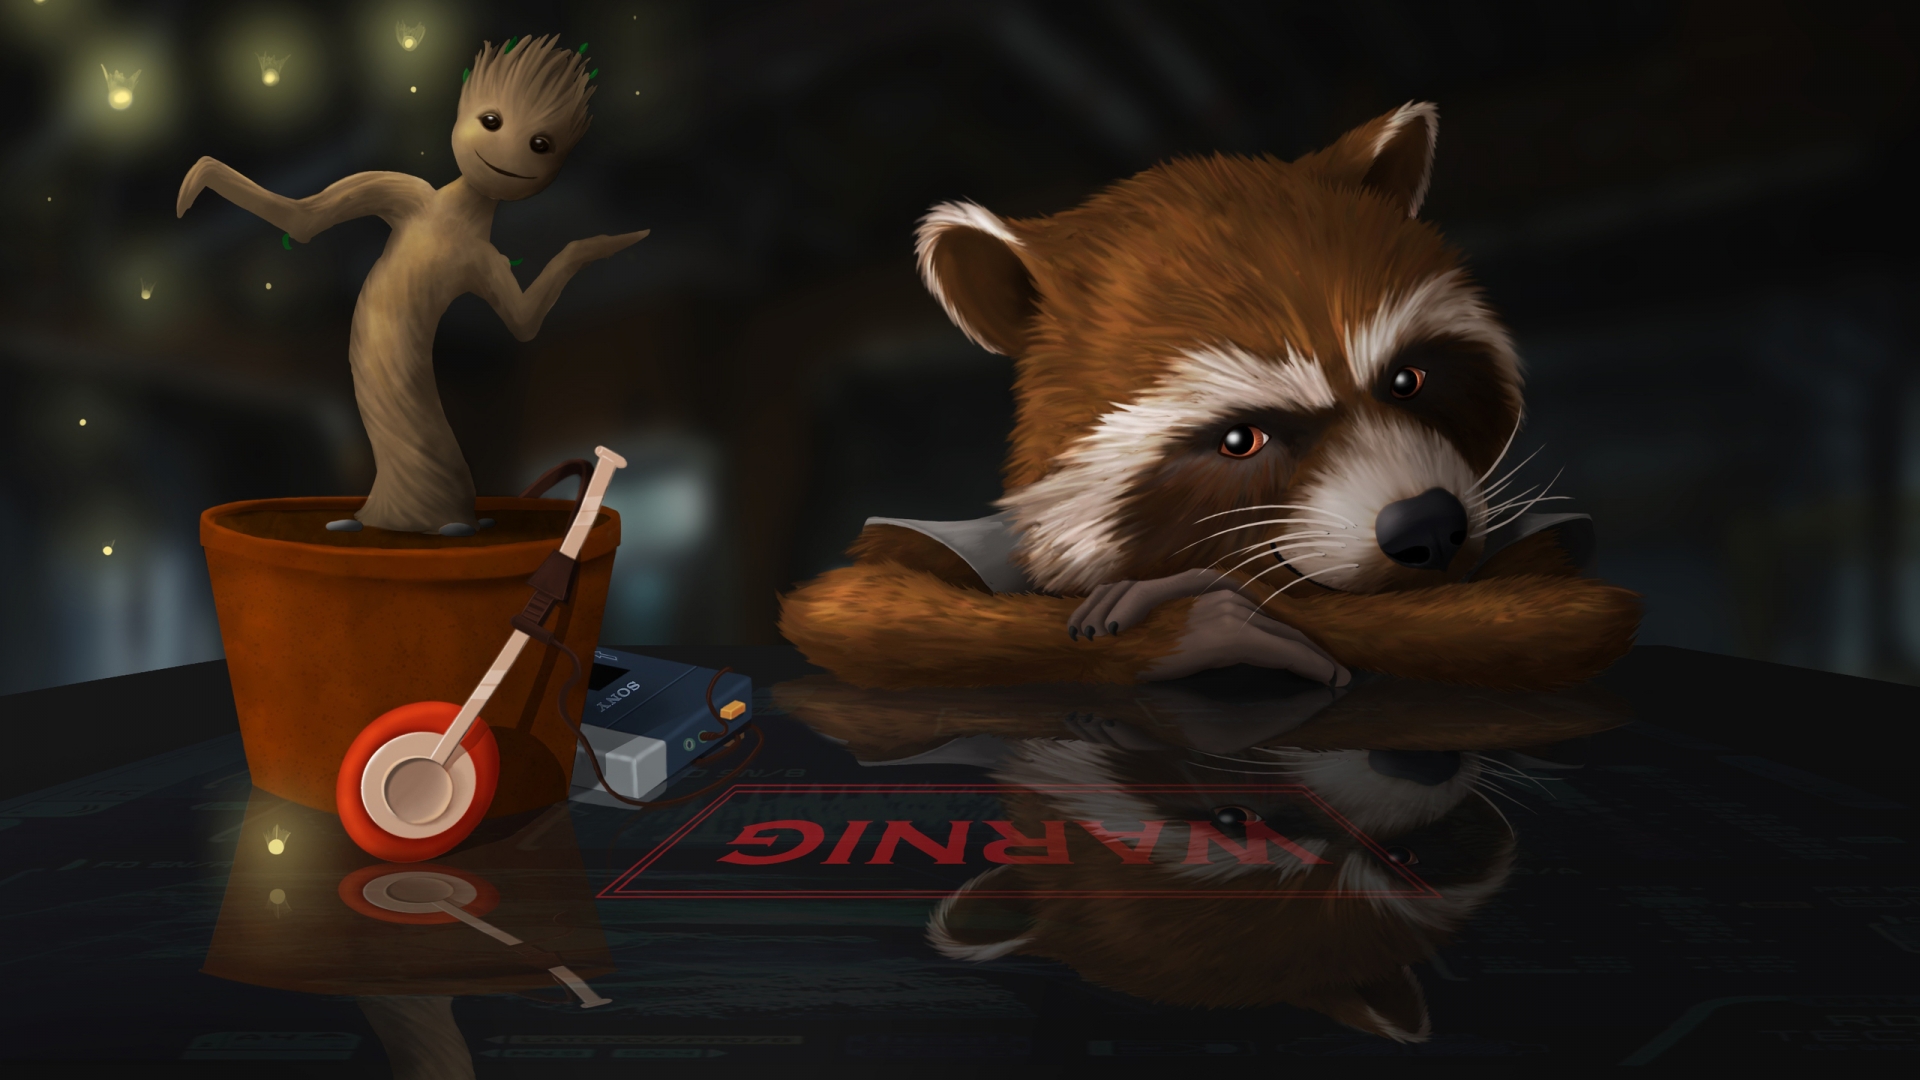 Guardians of the Galaxy Raccoon  for 1920 x 1080 HDTV 1080p resolution